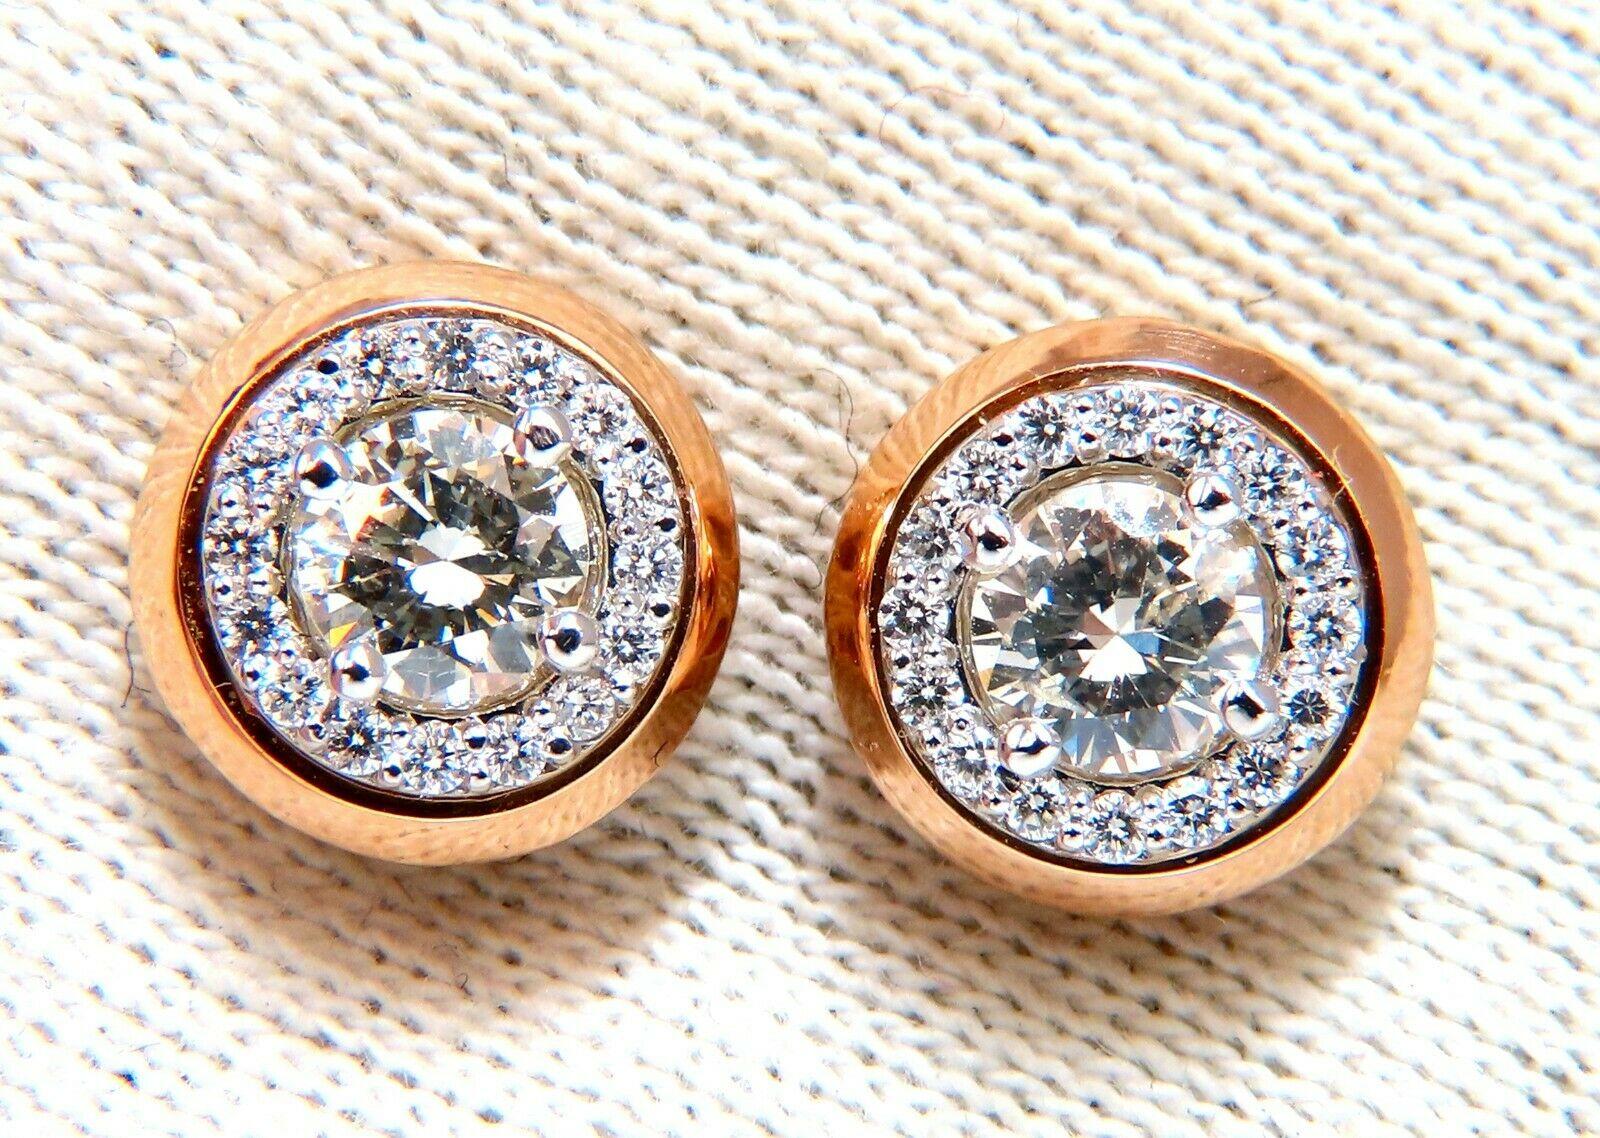  Halo Studs Diamond earrings.

.78ct Natural Round brilliant diamonds (2) 

 Si-1 clarity J-color

.34ct Round Diamond Accents Sorround

G-color, Vs-2 clarity.

Earrings: 10mm diameter

14kt. white / rose gold 

4.4 grams.

Comfortable butterfly &